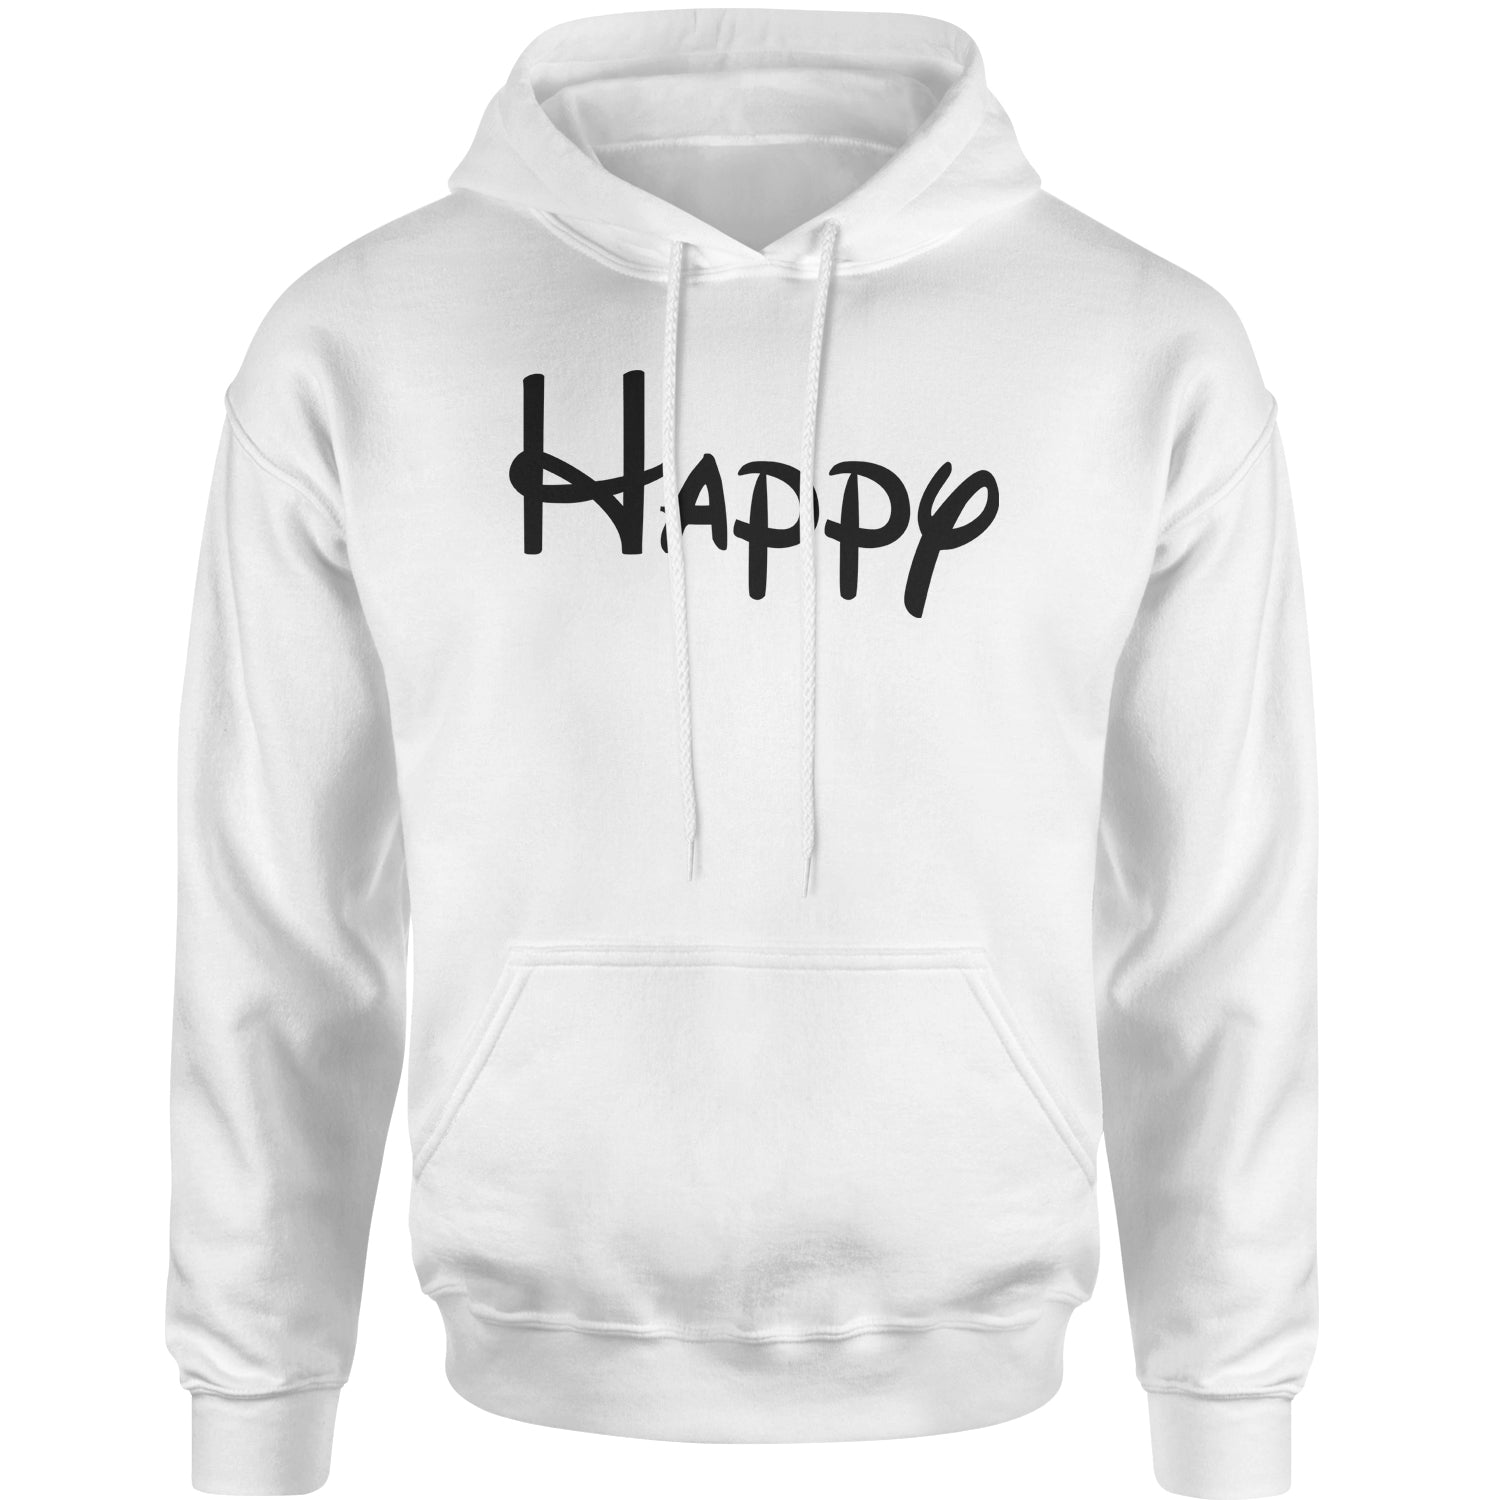 Happy - 7 Dwarfs Costume Adult Hoodie Sweatshirt and, costume, dwarfs, group, halloween, matching, seven, snow, the, white by Expression Tees